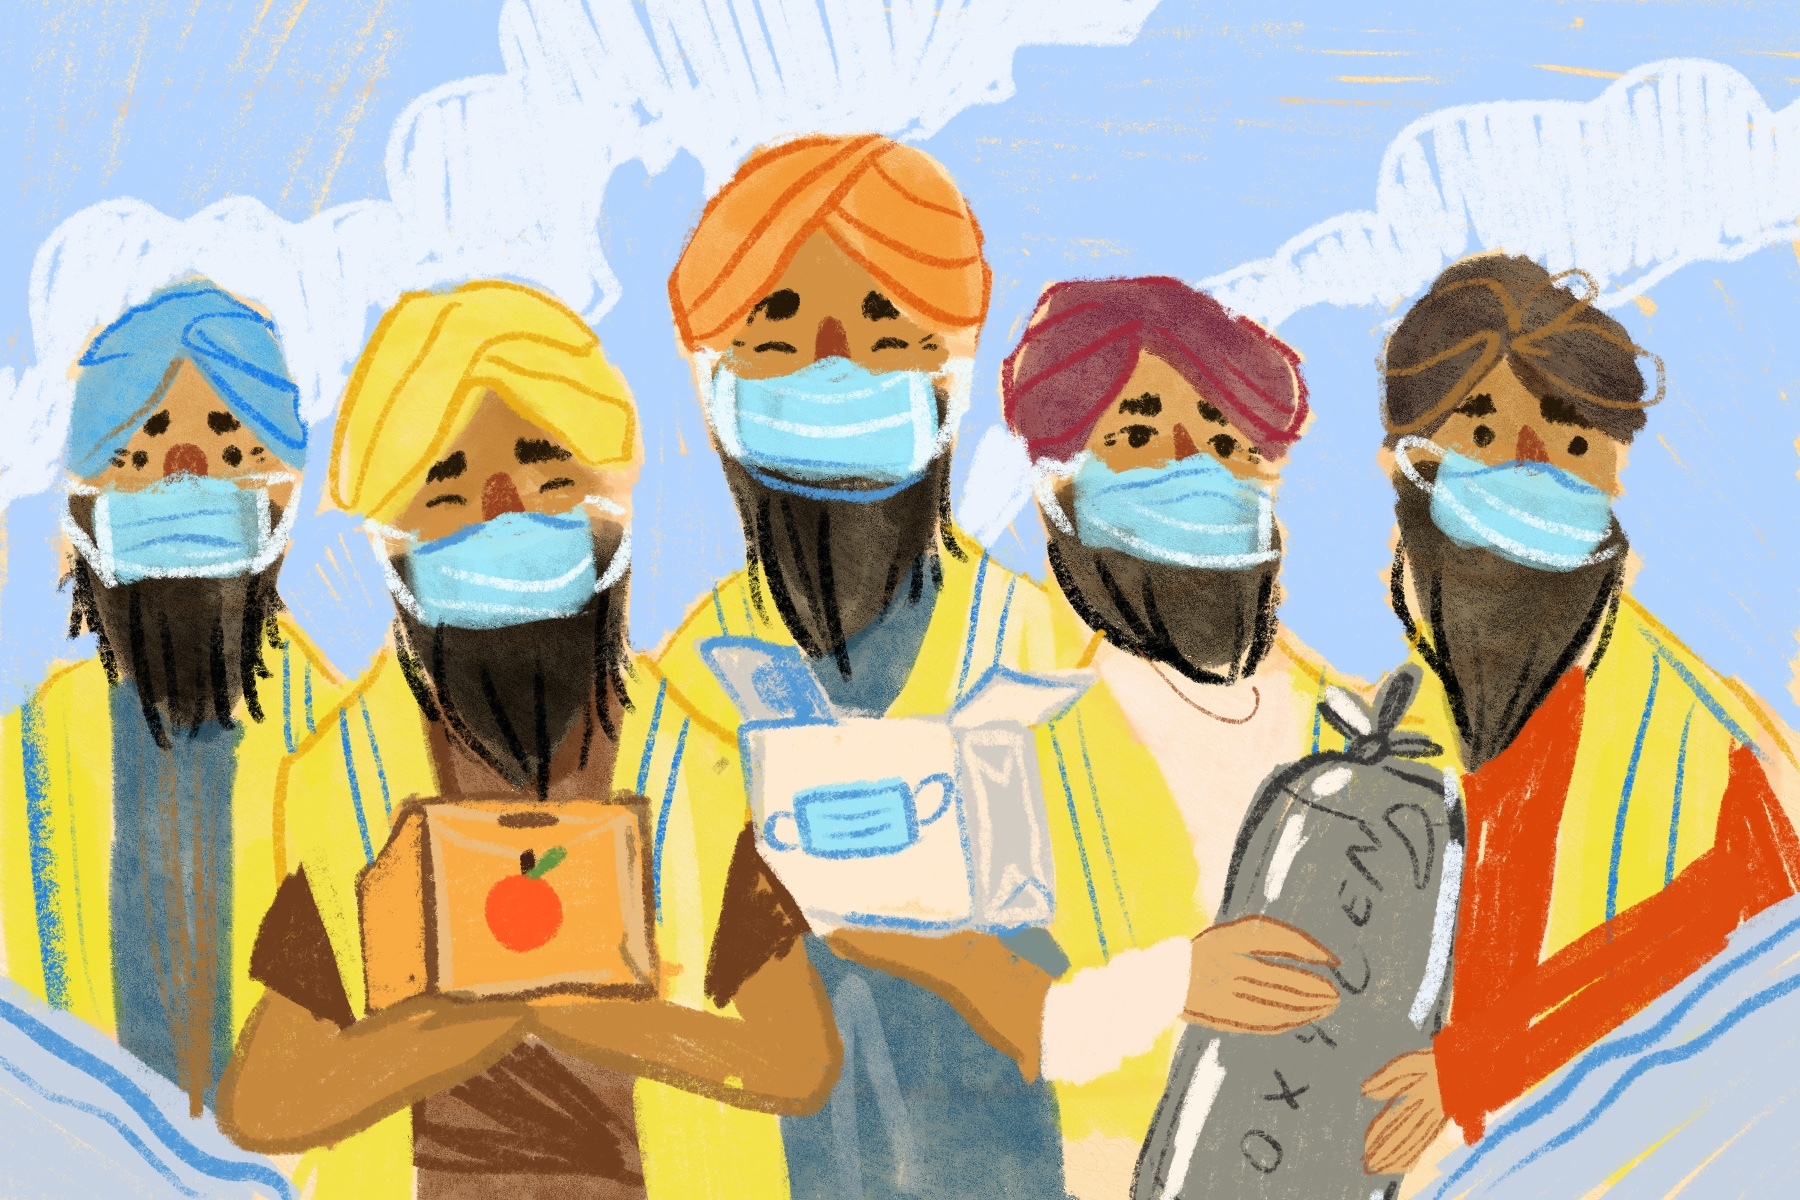 Illustration of Sikhs in masks, in an article about the Sikh community